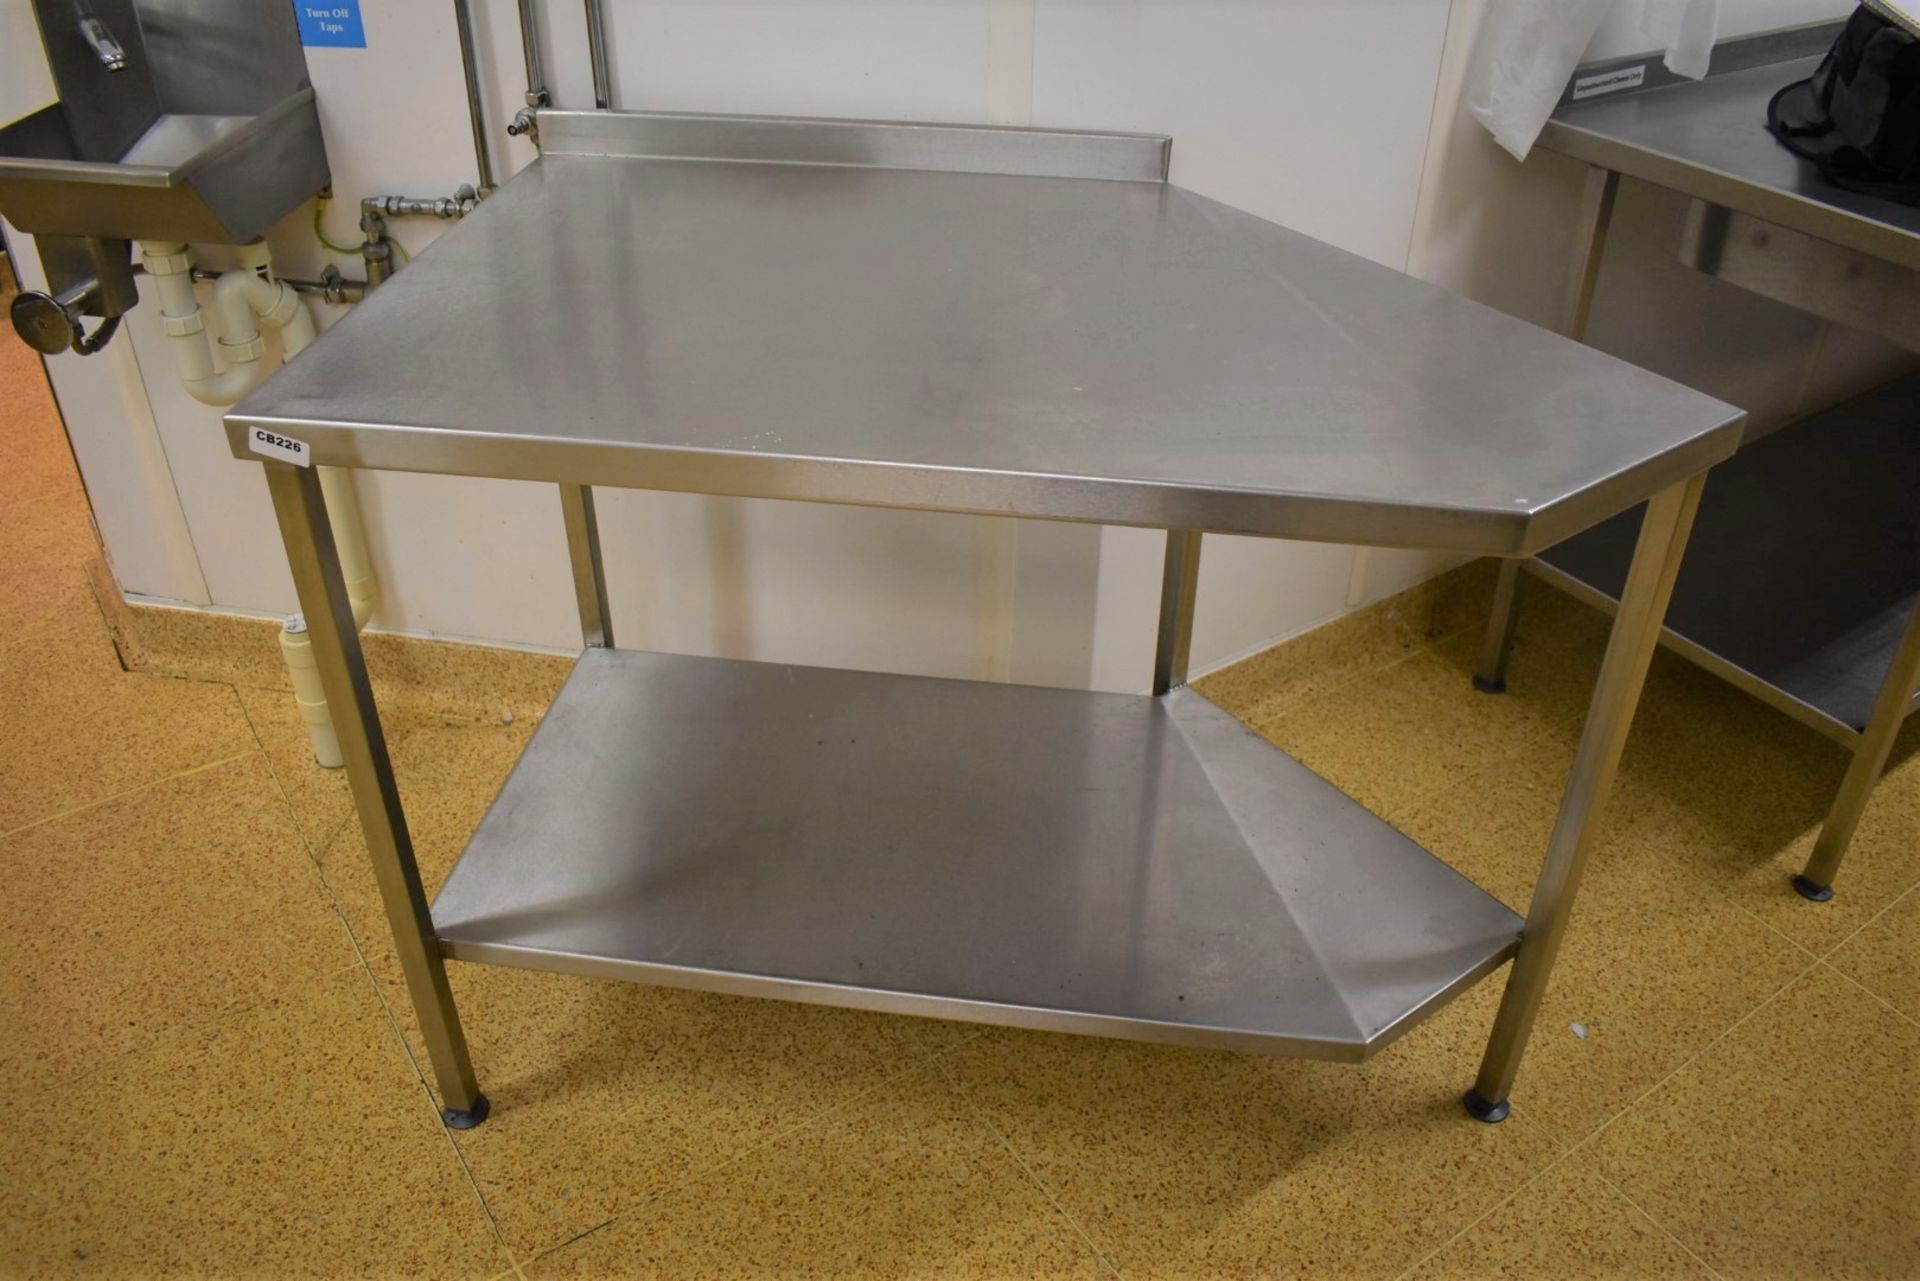 1 x Stainless Steel Corner Prep Table With Upstand and Undershelf - H86 x W109 x D70 cms - CL455 -